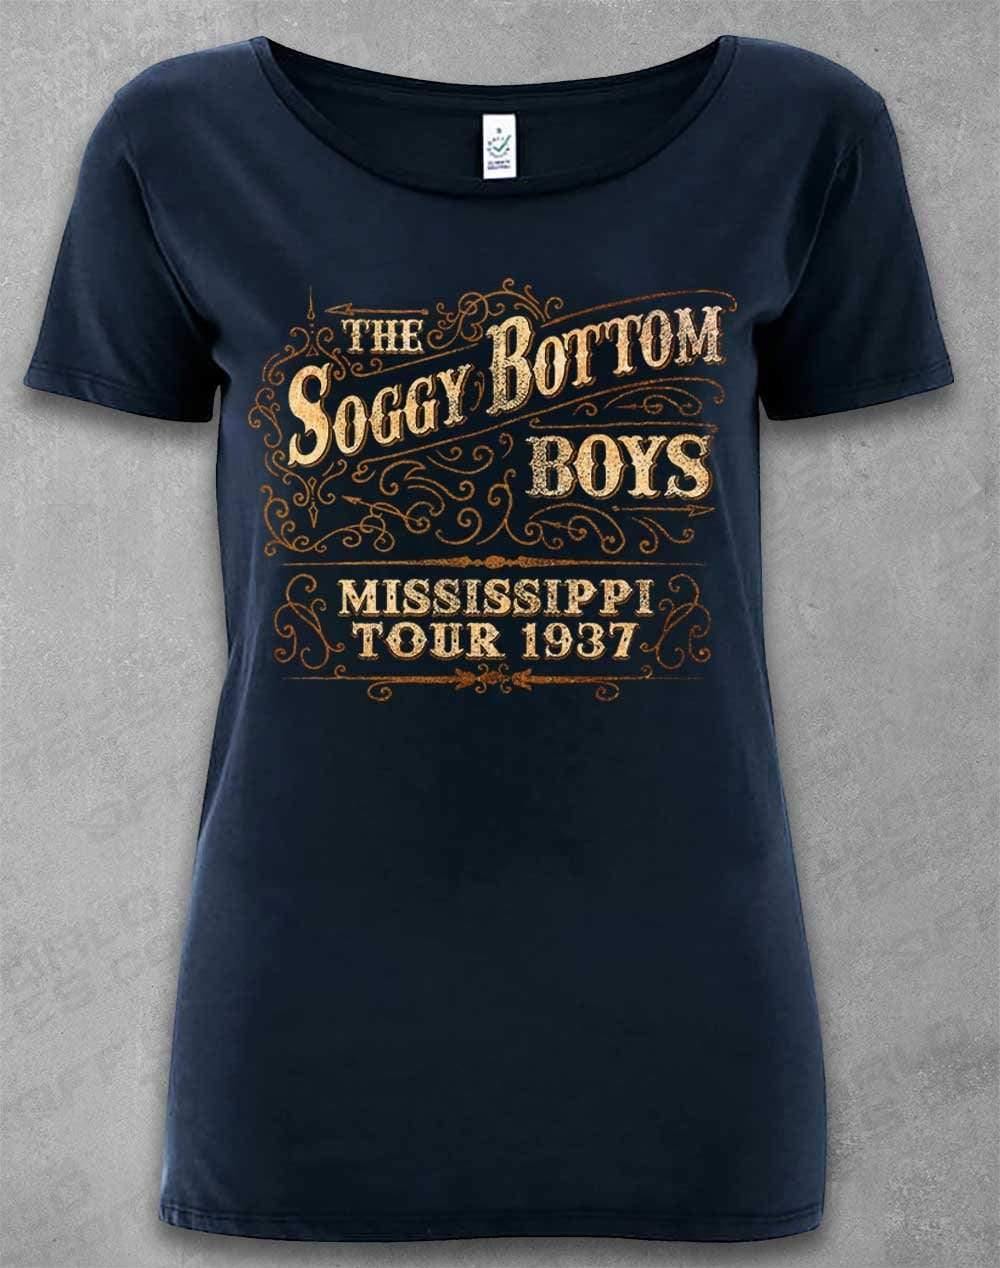 DELUXE Soggy Bottom Boys Tour 1937 Organic Scoop Neck T-Shirt 8-10 / Navy  - Off World Tees